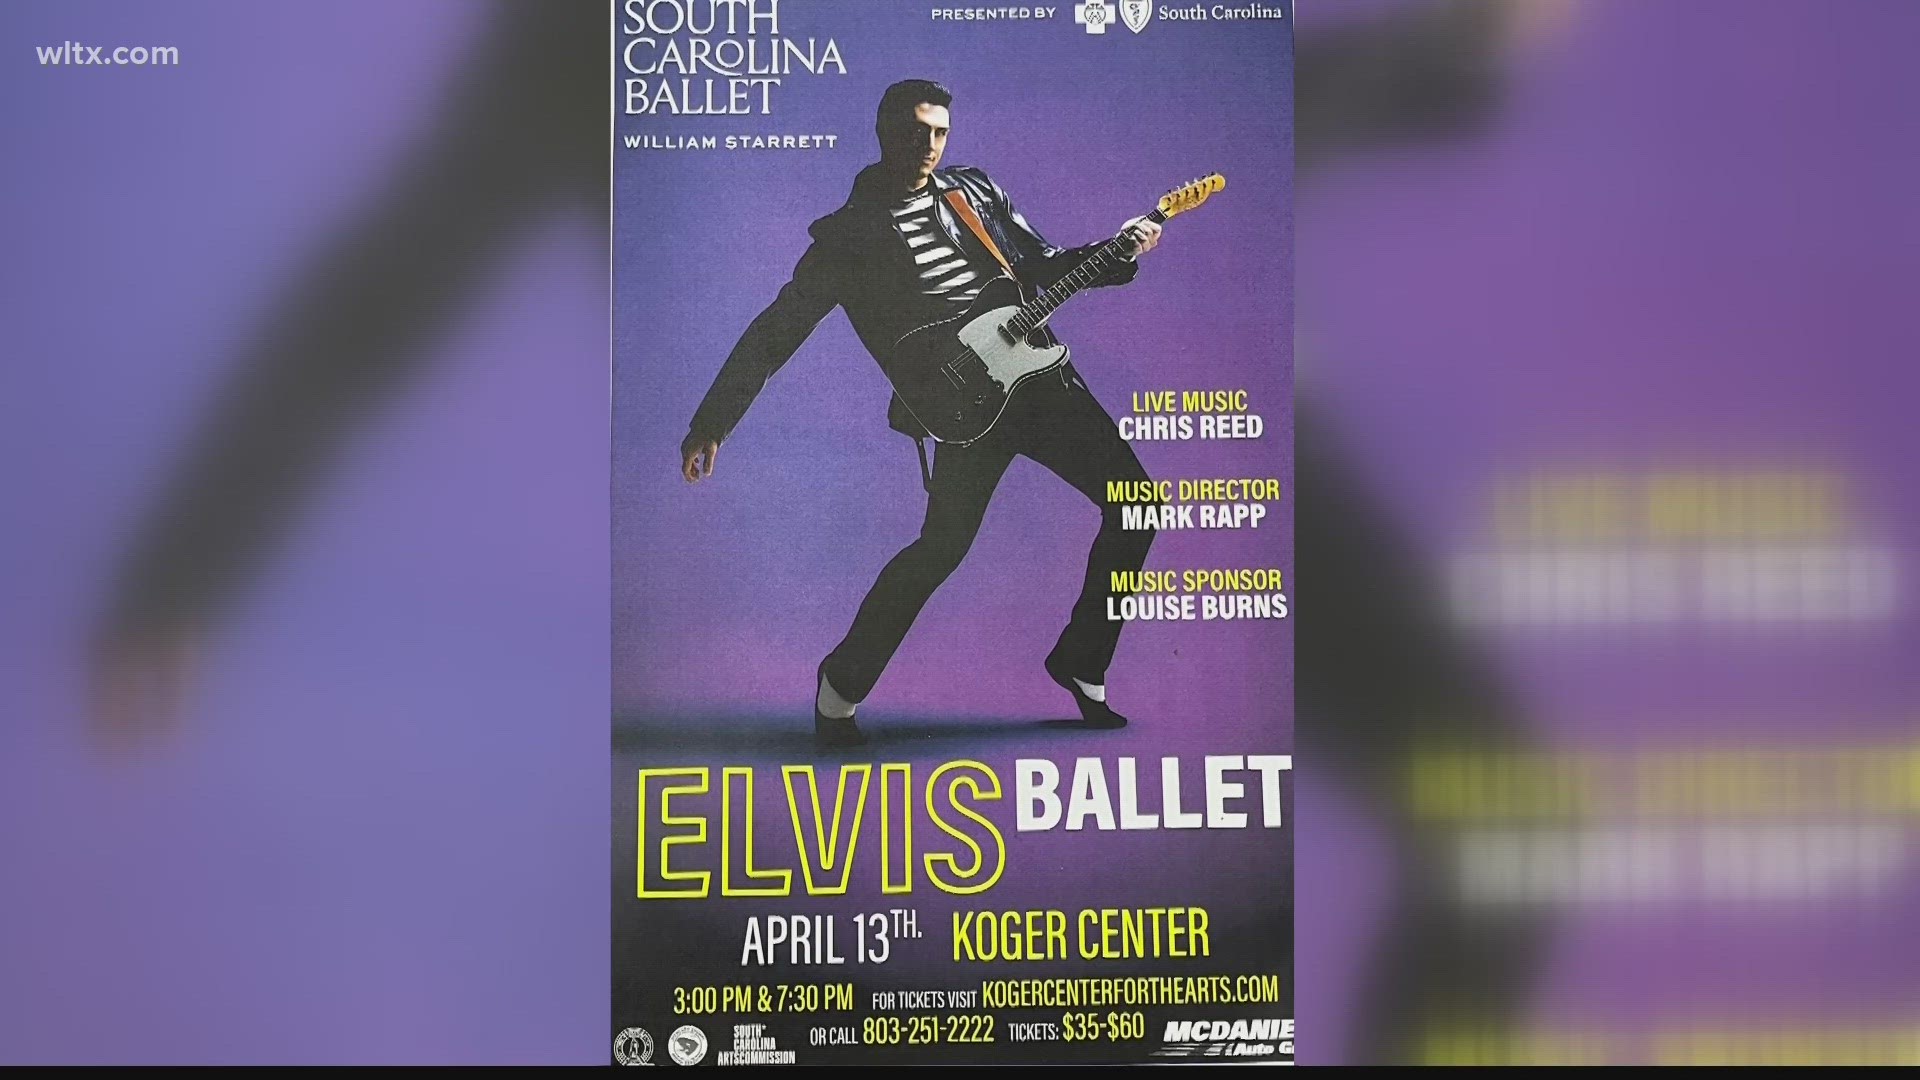 The ballet will be this weekend at the Koger Center.